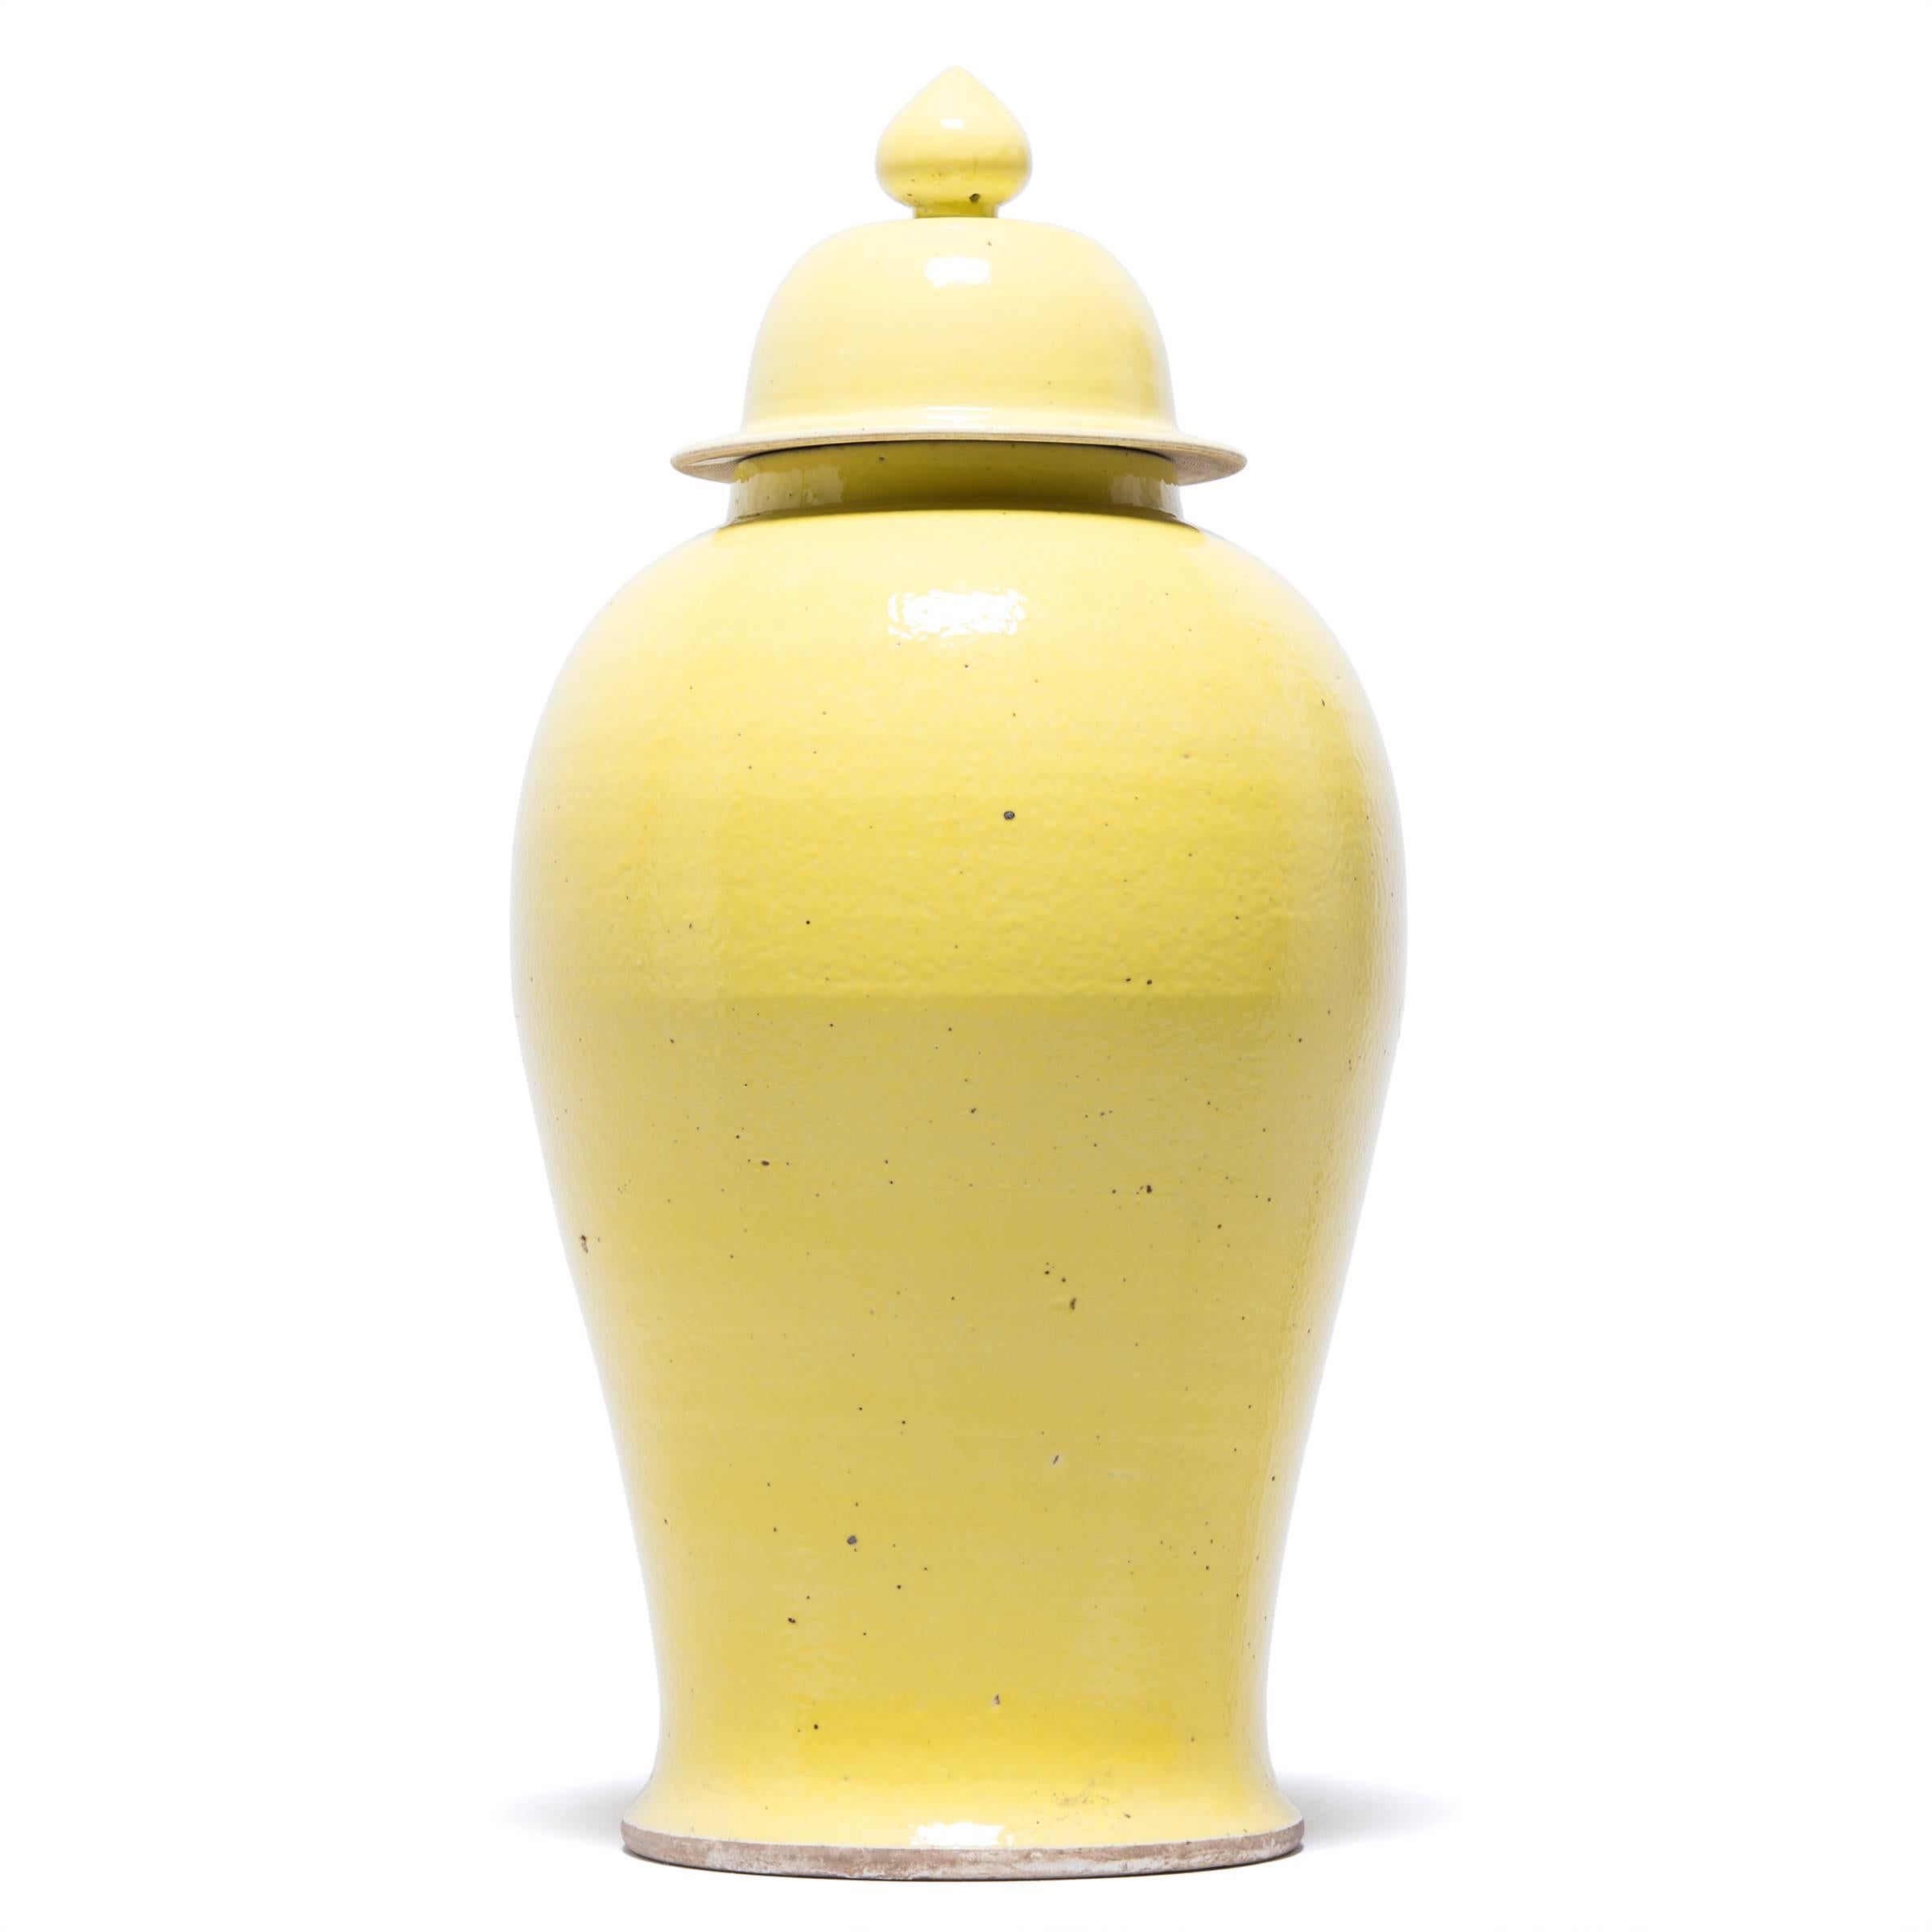 This contemporary take on the traditional baluster jar puts all the focus on its timeless silhouette. Characterized by its high shoulders, flared base and domed lid, the elegant baluster jar form is accentuated here with a cheerful, citron-yellow